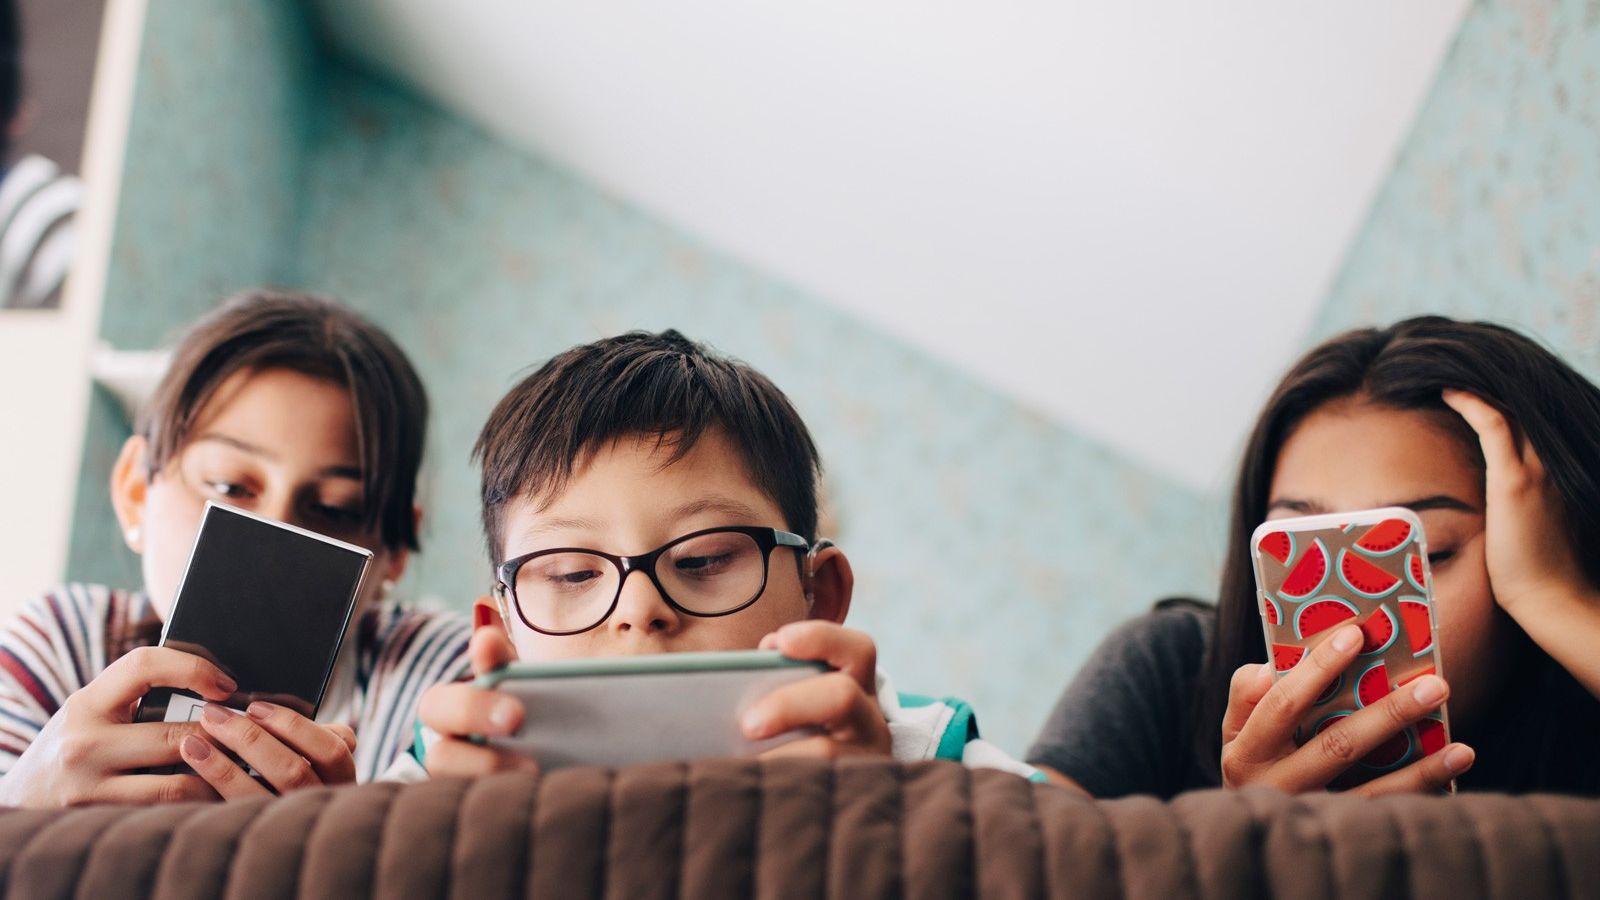 Excess screen time impacts children’s health: Health officer